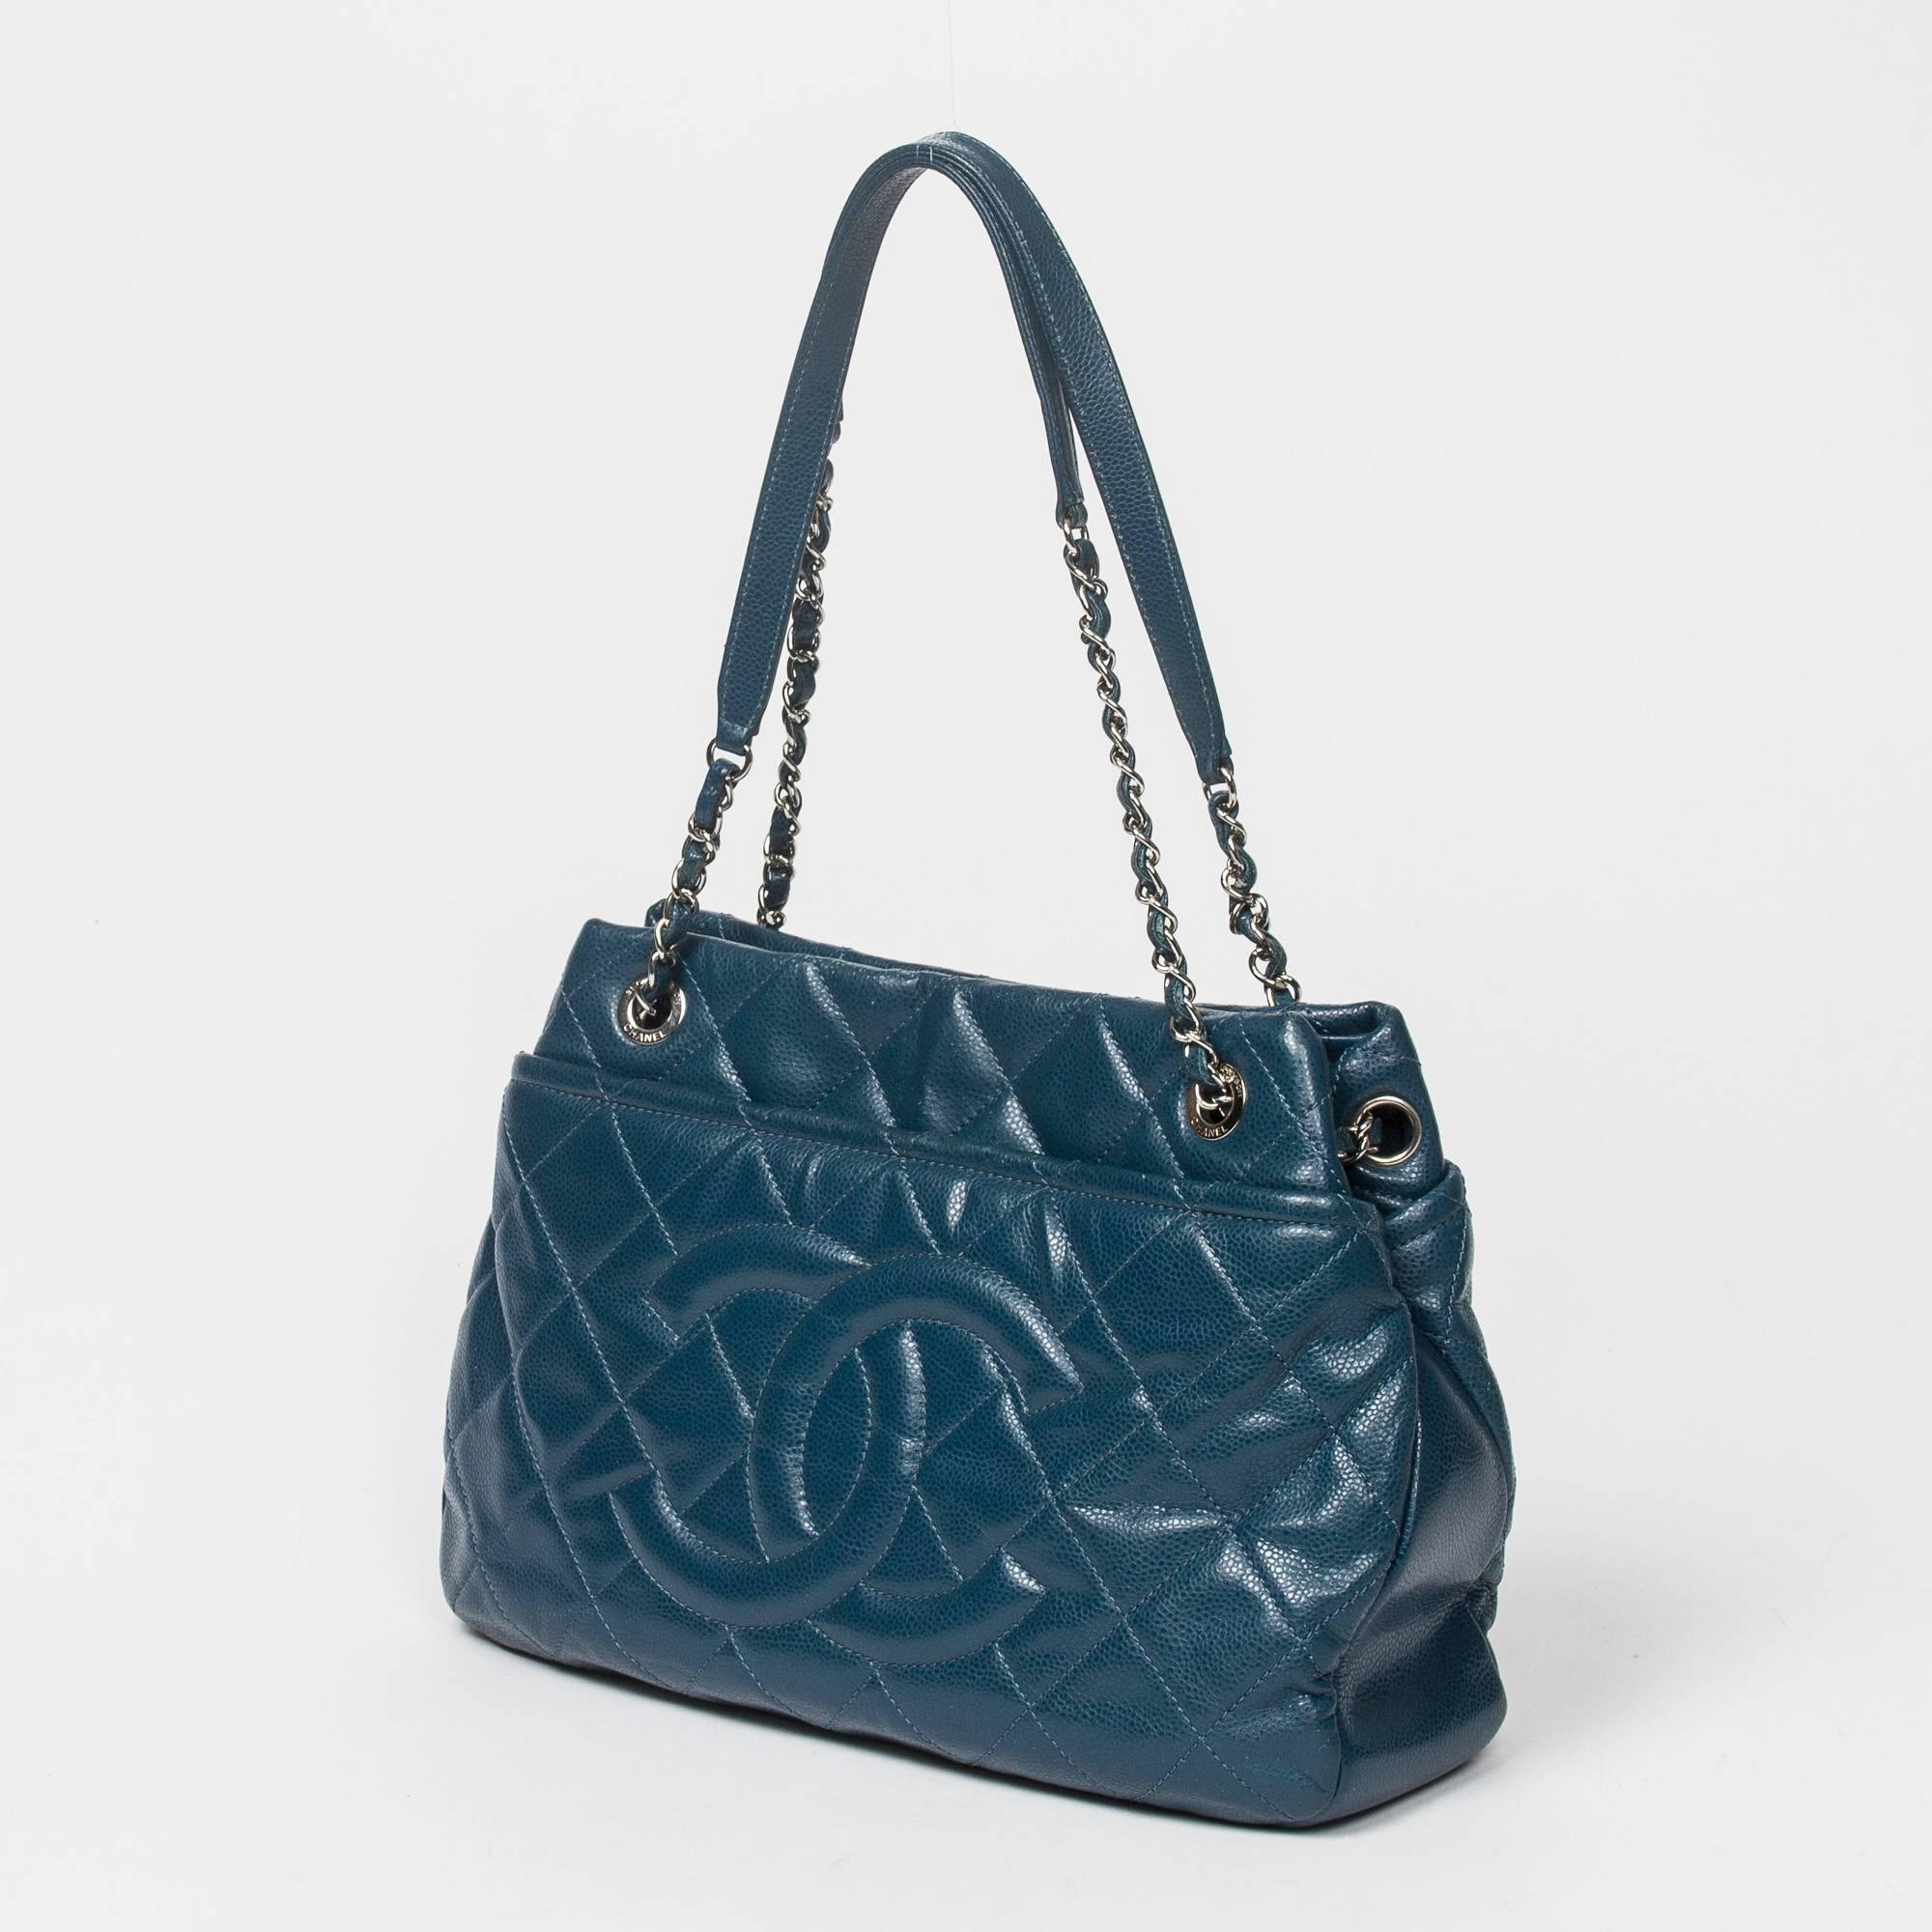 Shoulder Tote Front Logo in blue caviar quilted leather, double chain strap interlaced with leather, silver tone hardware. Back and front slip pockets. Ivory leather lined interior with 2 slip pockets and 1 zip pocket. Gold tone heat stamp 